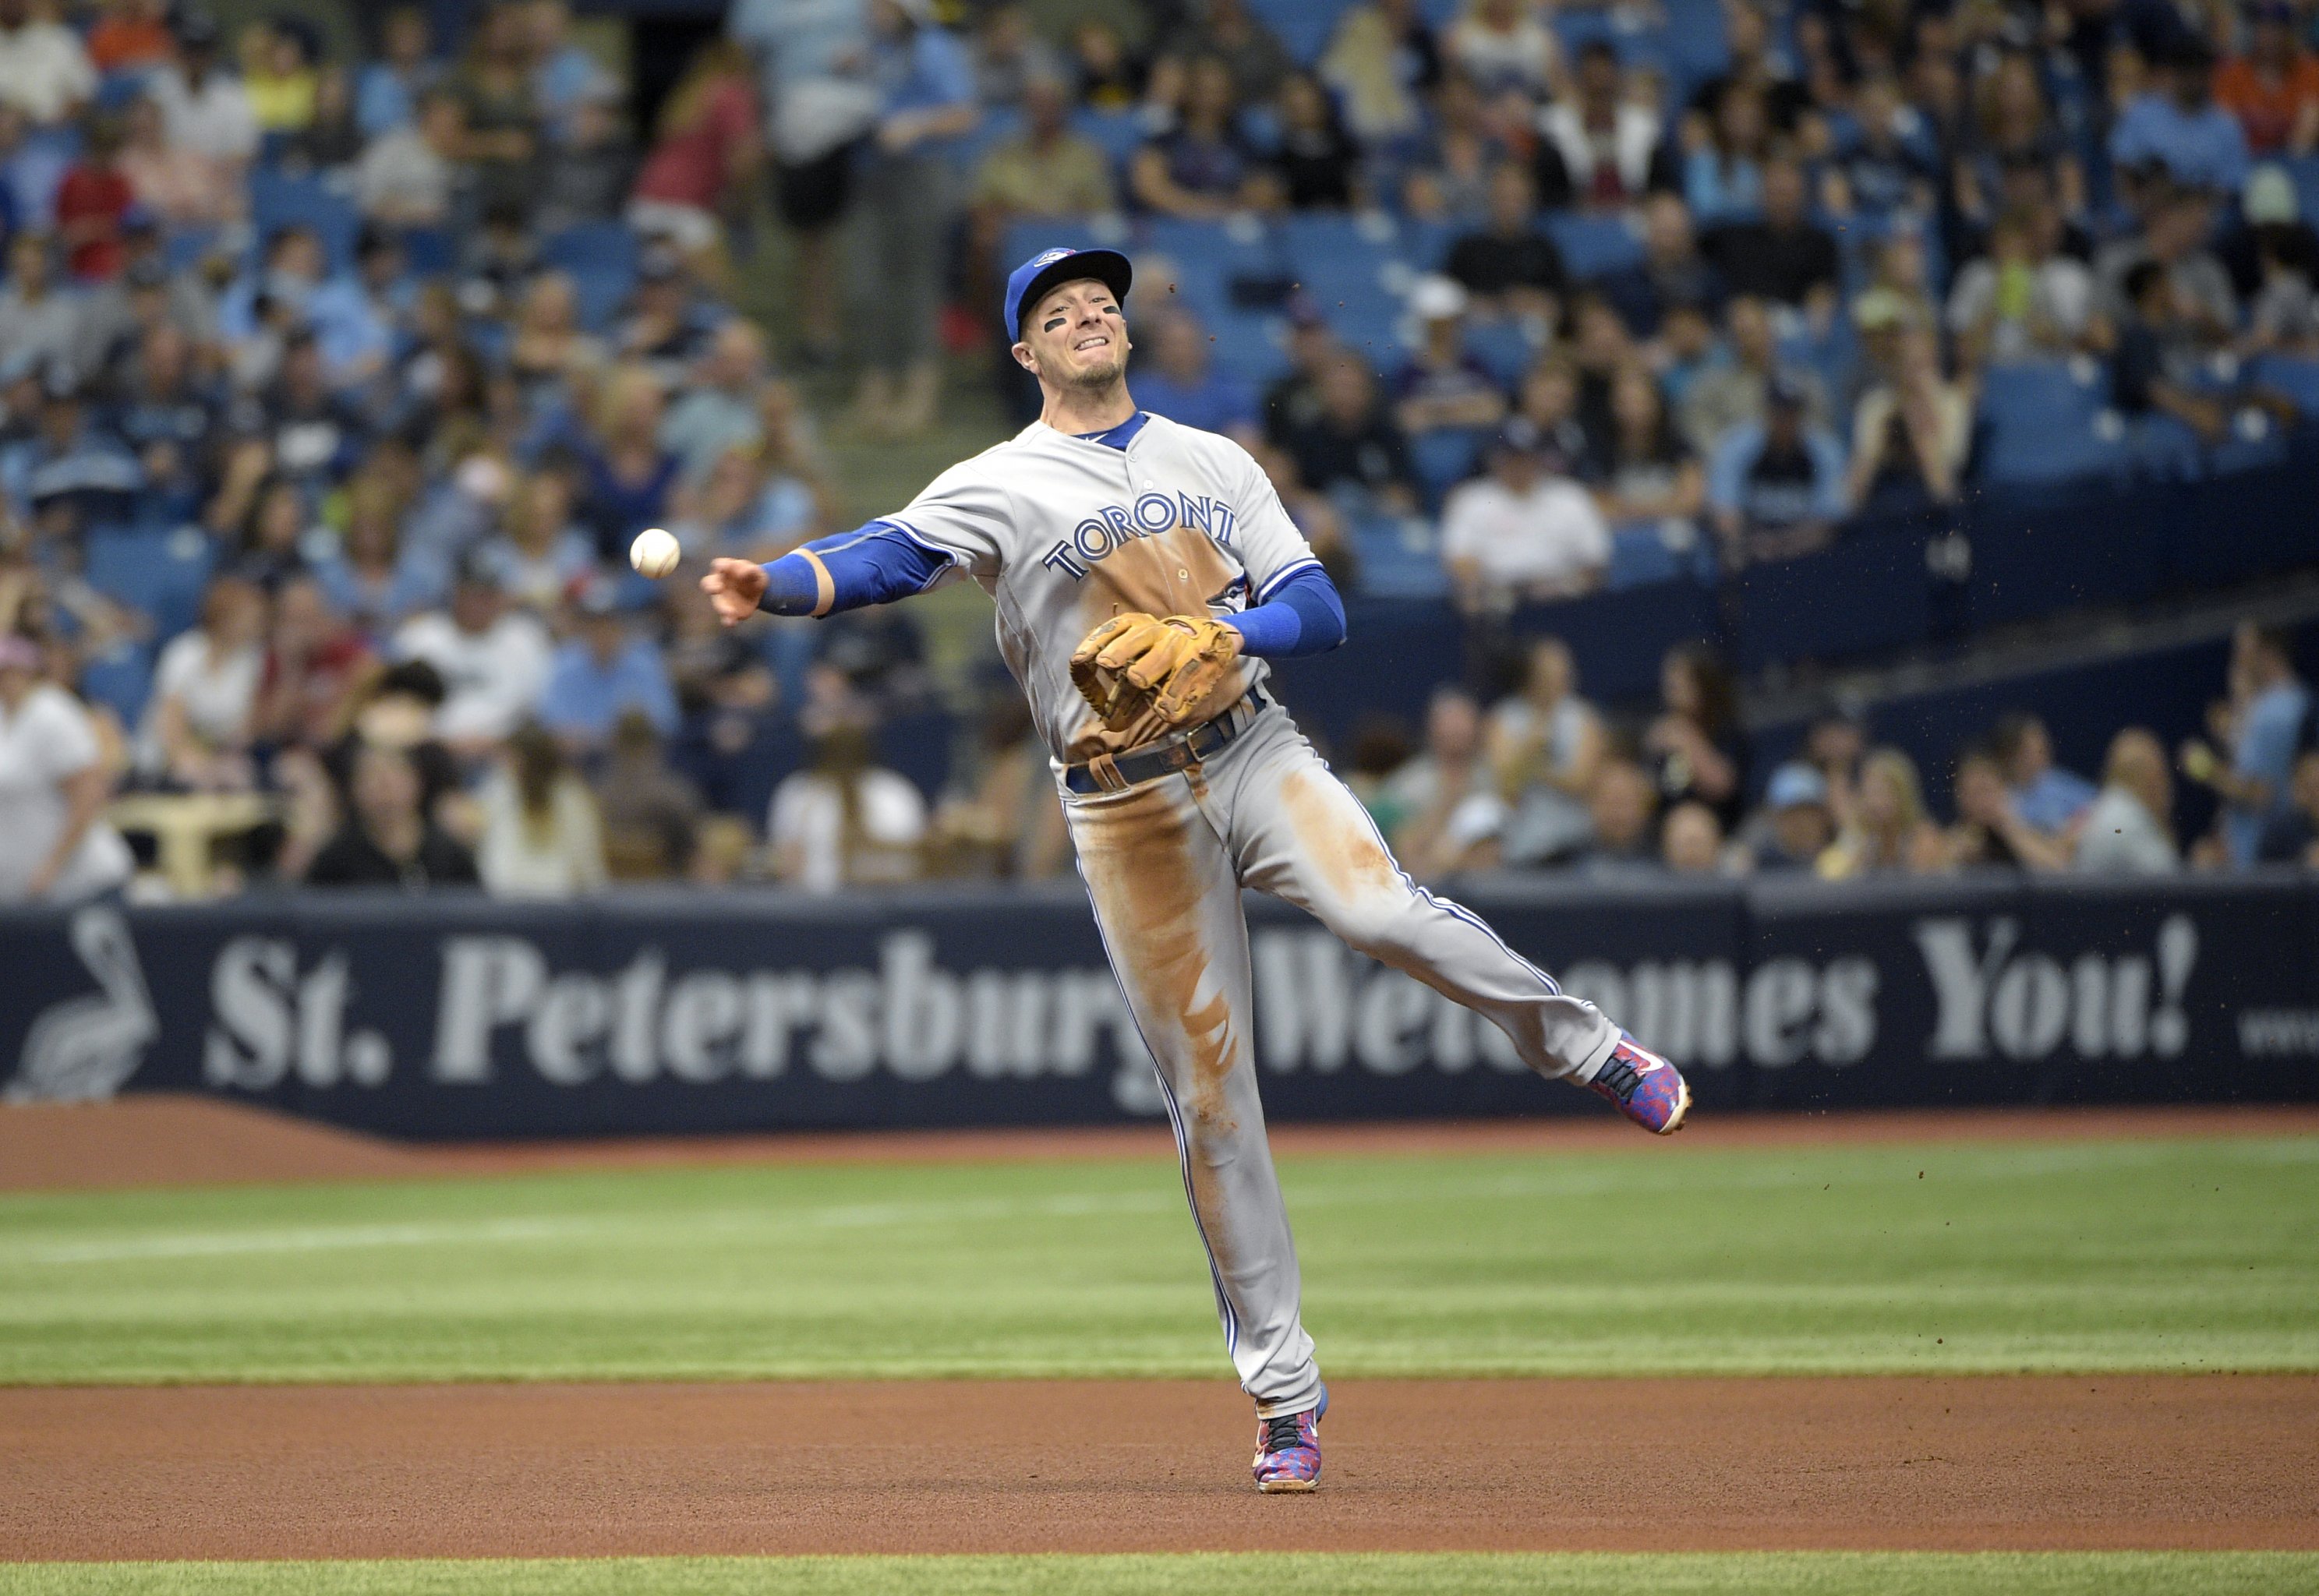 Tulowitzki didn't correct a photographer who thought he was a pitcher